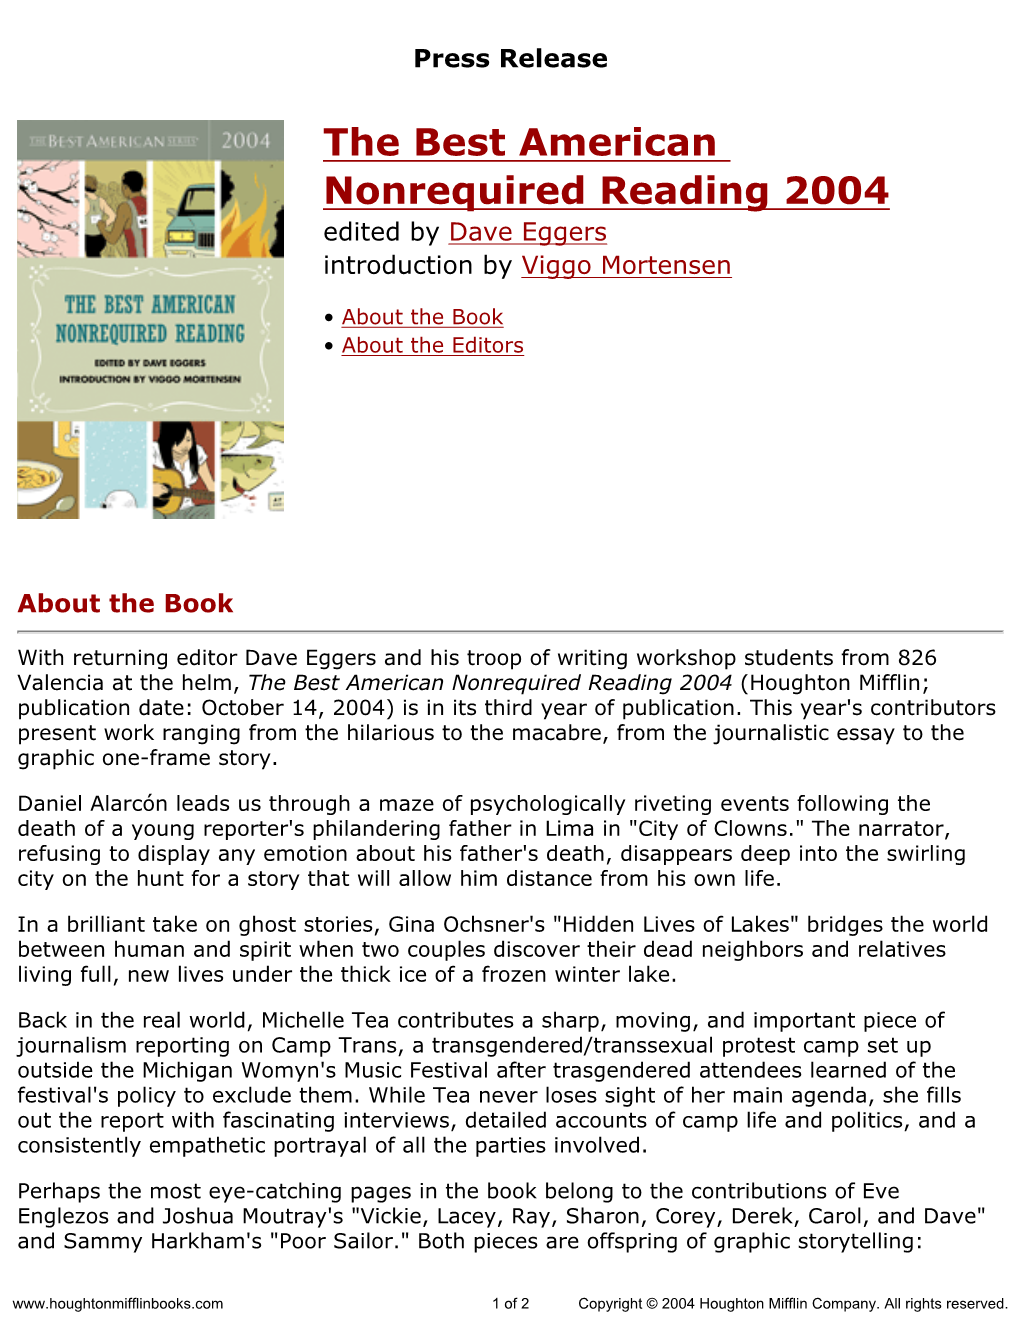 Press Release for the Best American Nonrequired Reading 2004 Edited